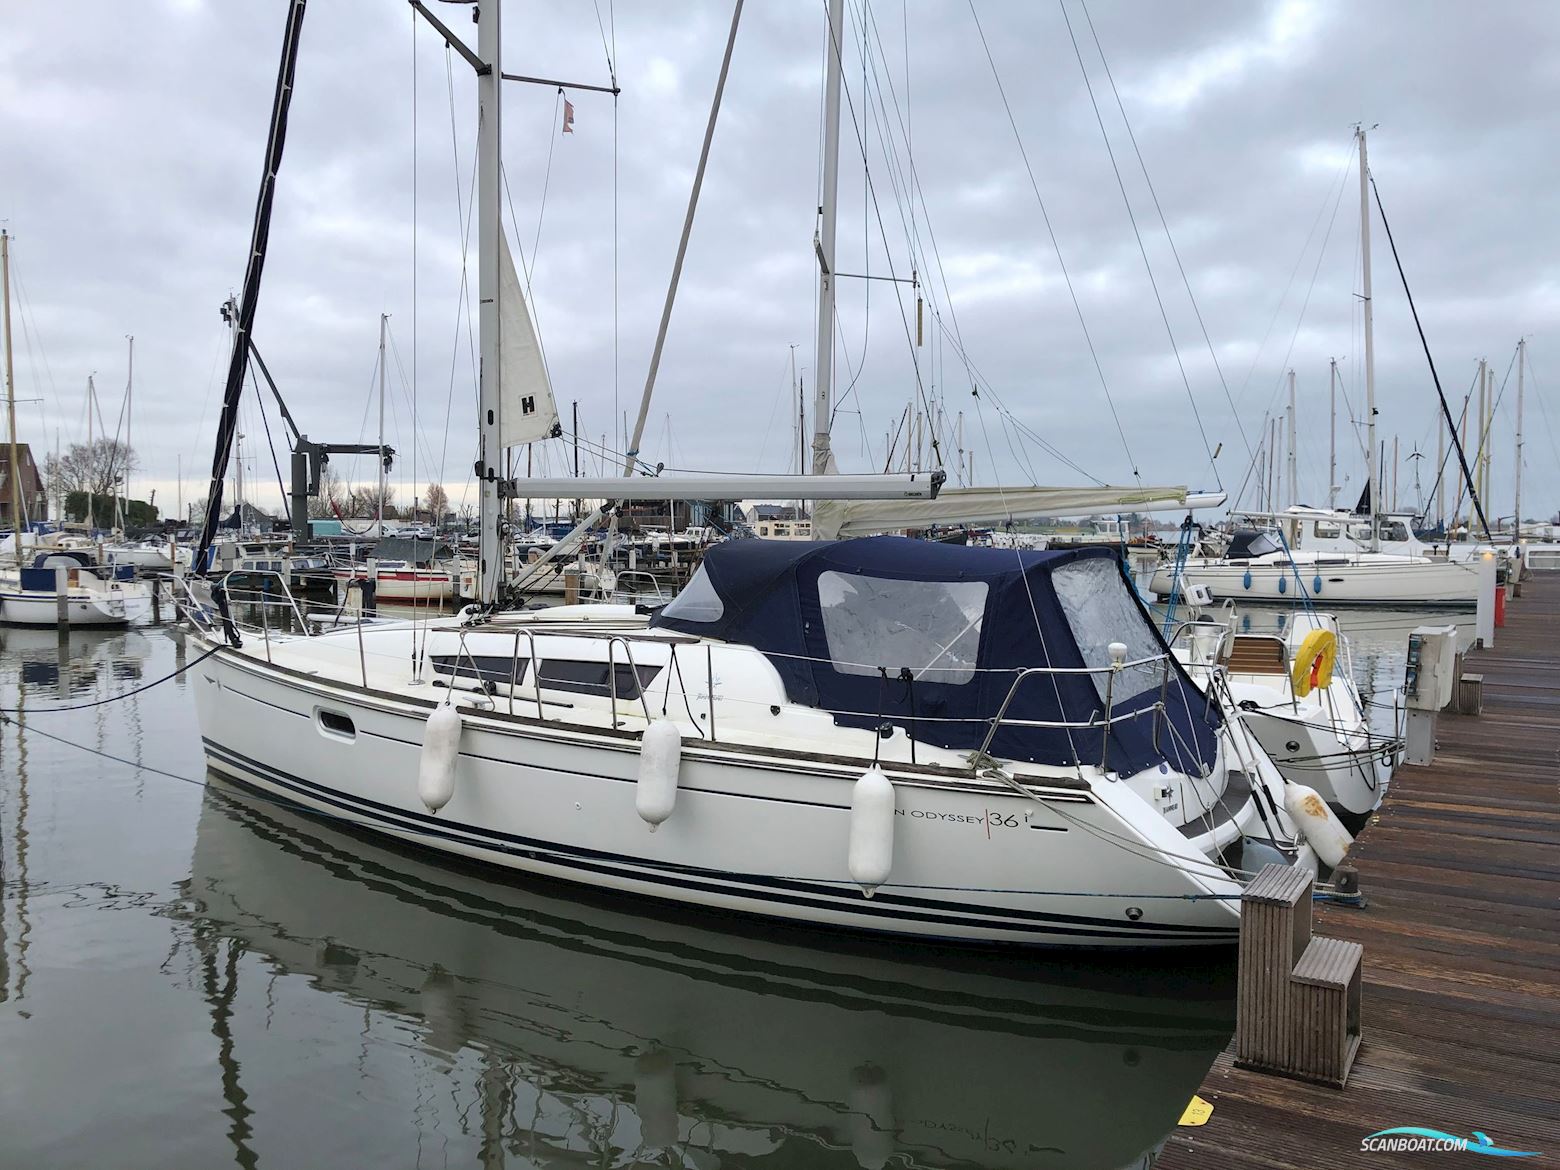 Jeanneau Sun Odyssey 36i Sailing boat 2009, with Yanmar engine, The Netherlands